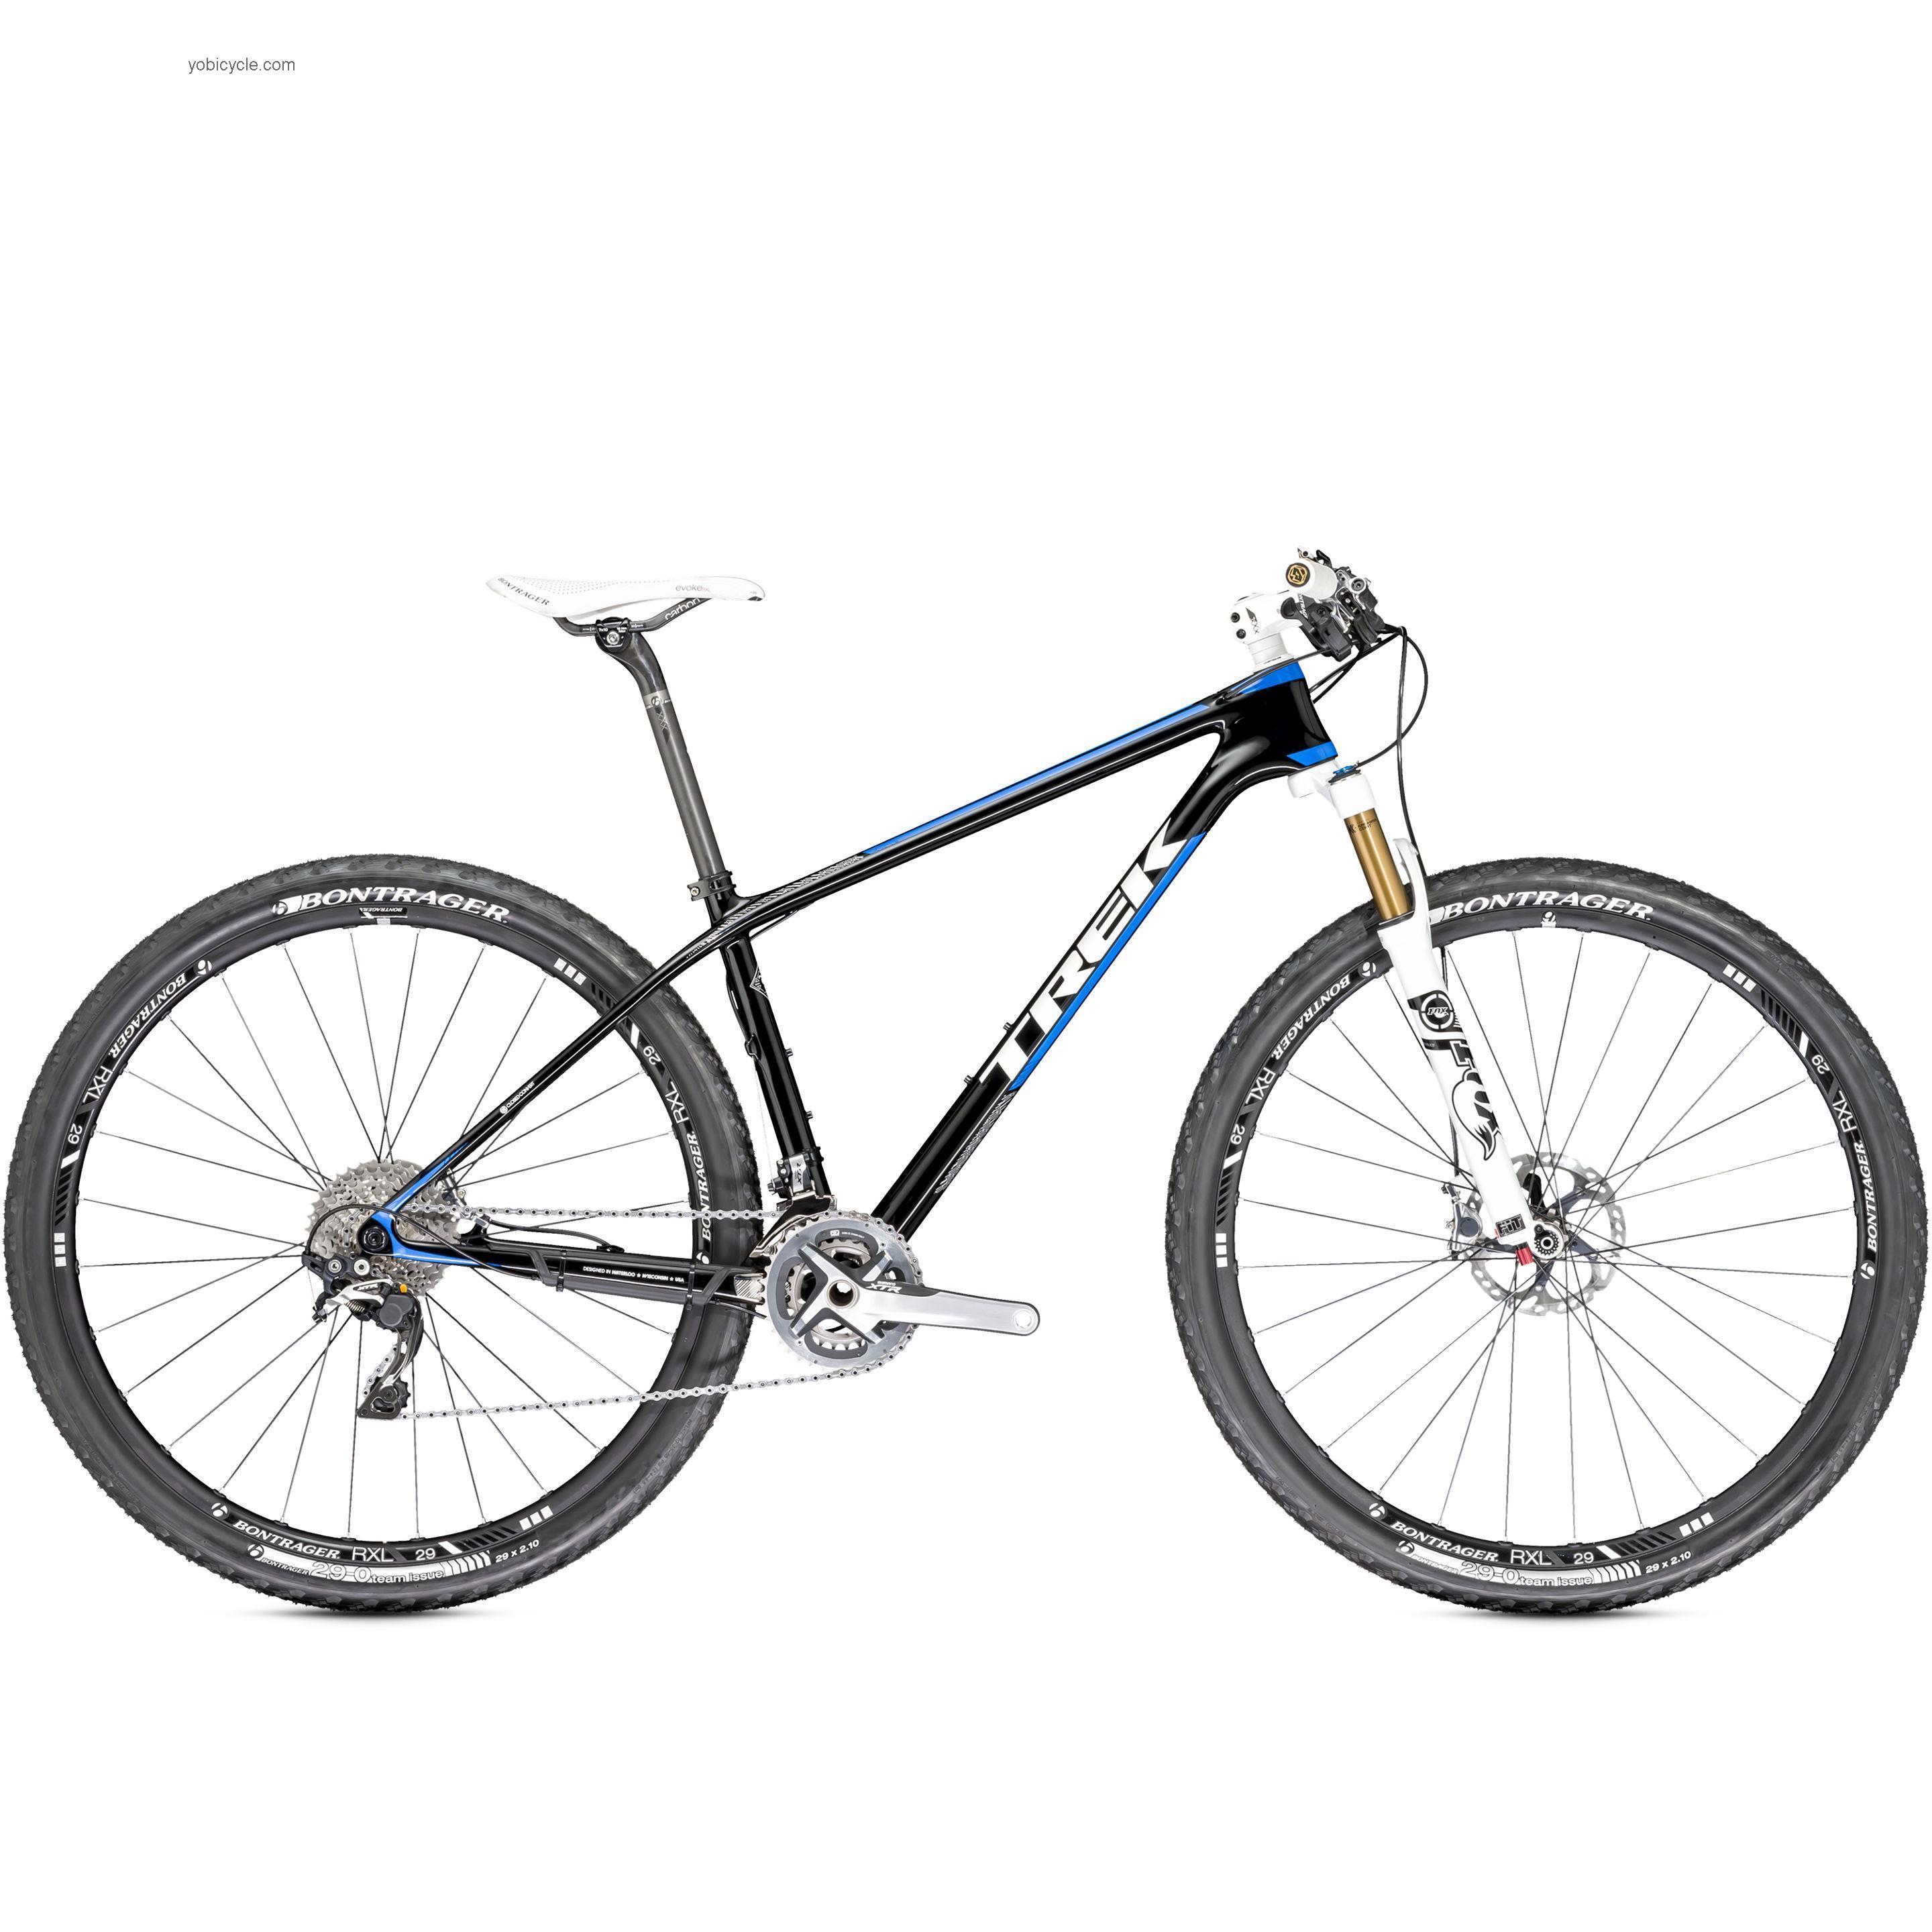 Trek Superfly 9.9 SL XTR competitors and comparison tool online specs and performance